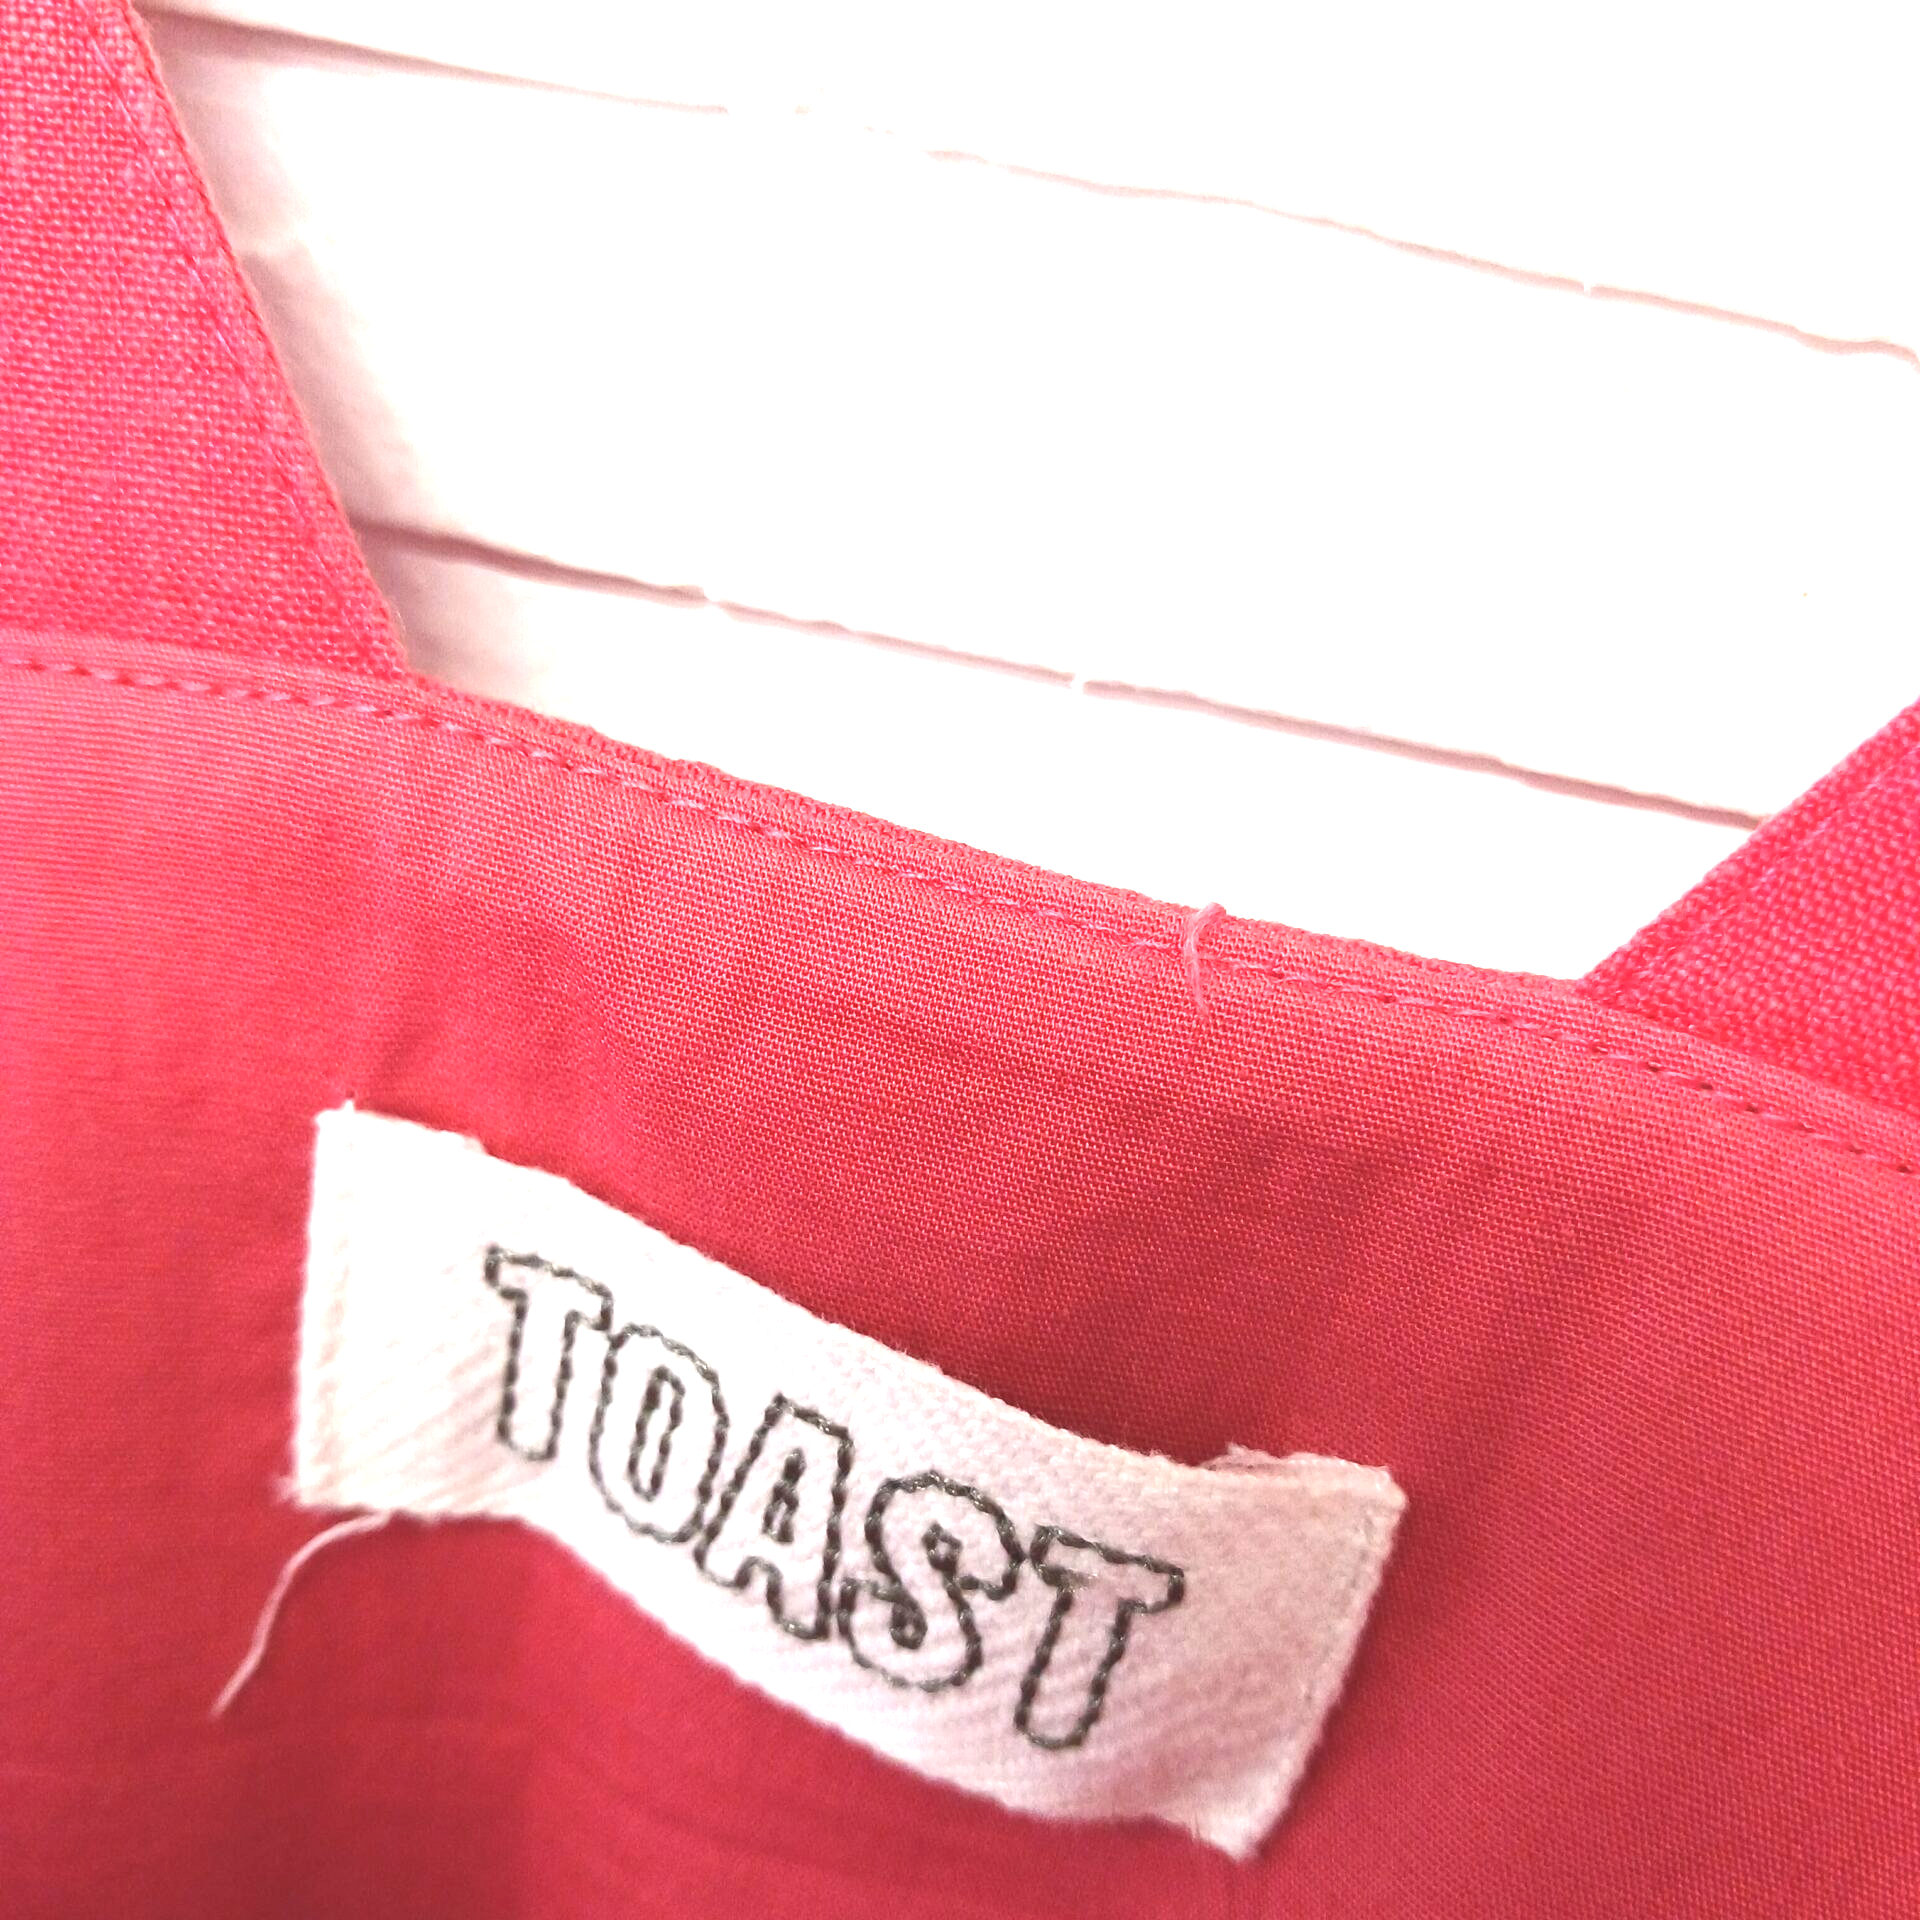 TOAST Red Coral Pinafore Dress Linen Size 14 - St Richard's Hospice Shop